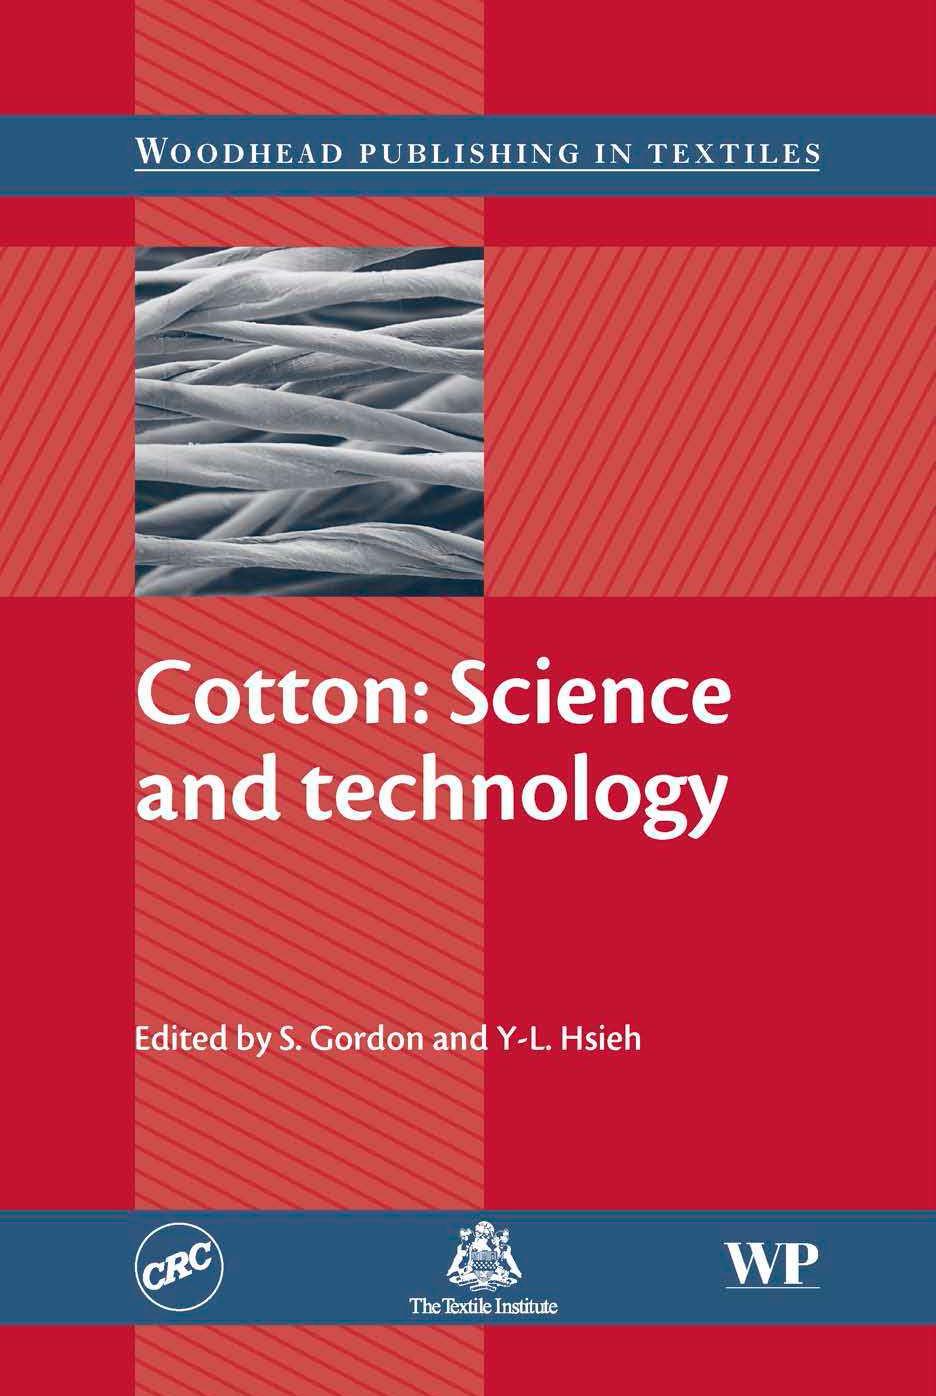 [Cotton+Science+and+technology.JPG]